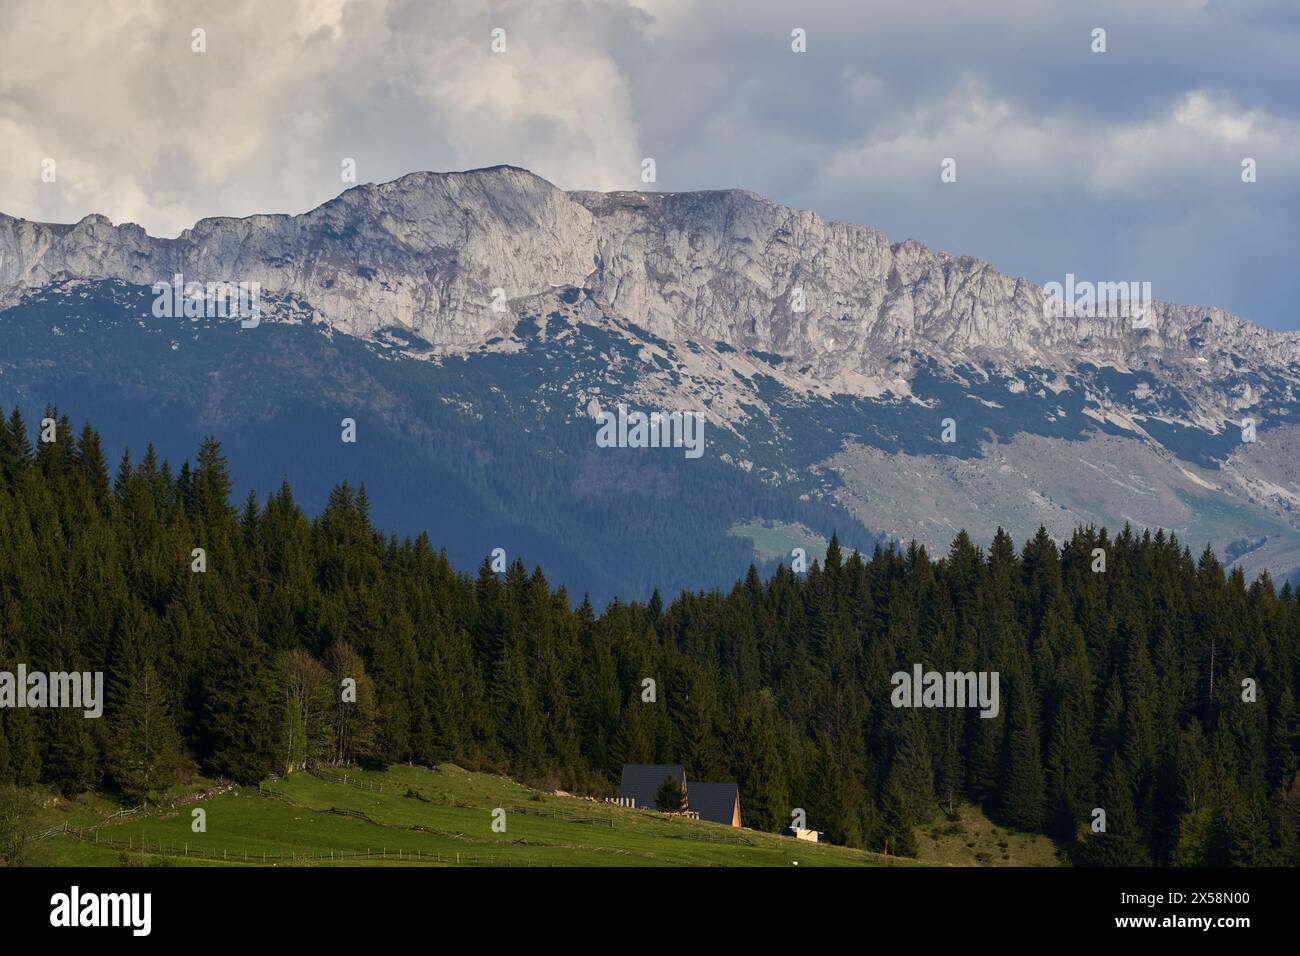 Landscape with rocky mountains and pine and fir forests Stock Photo